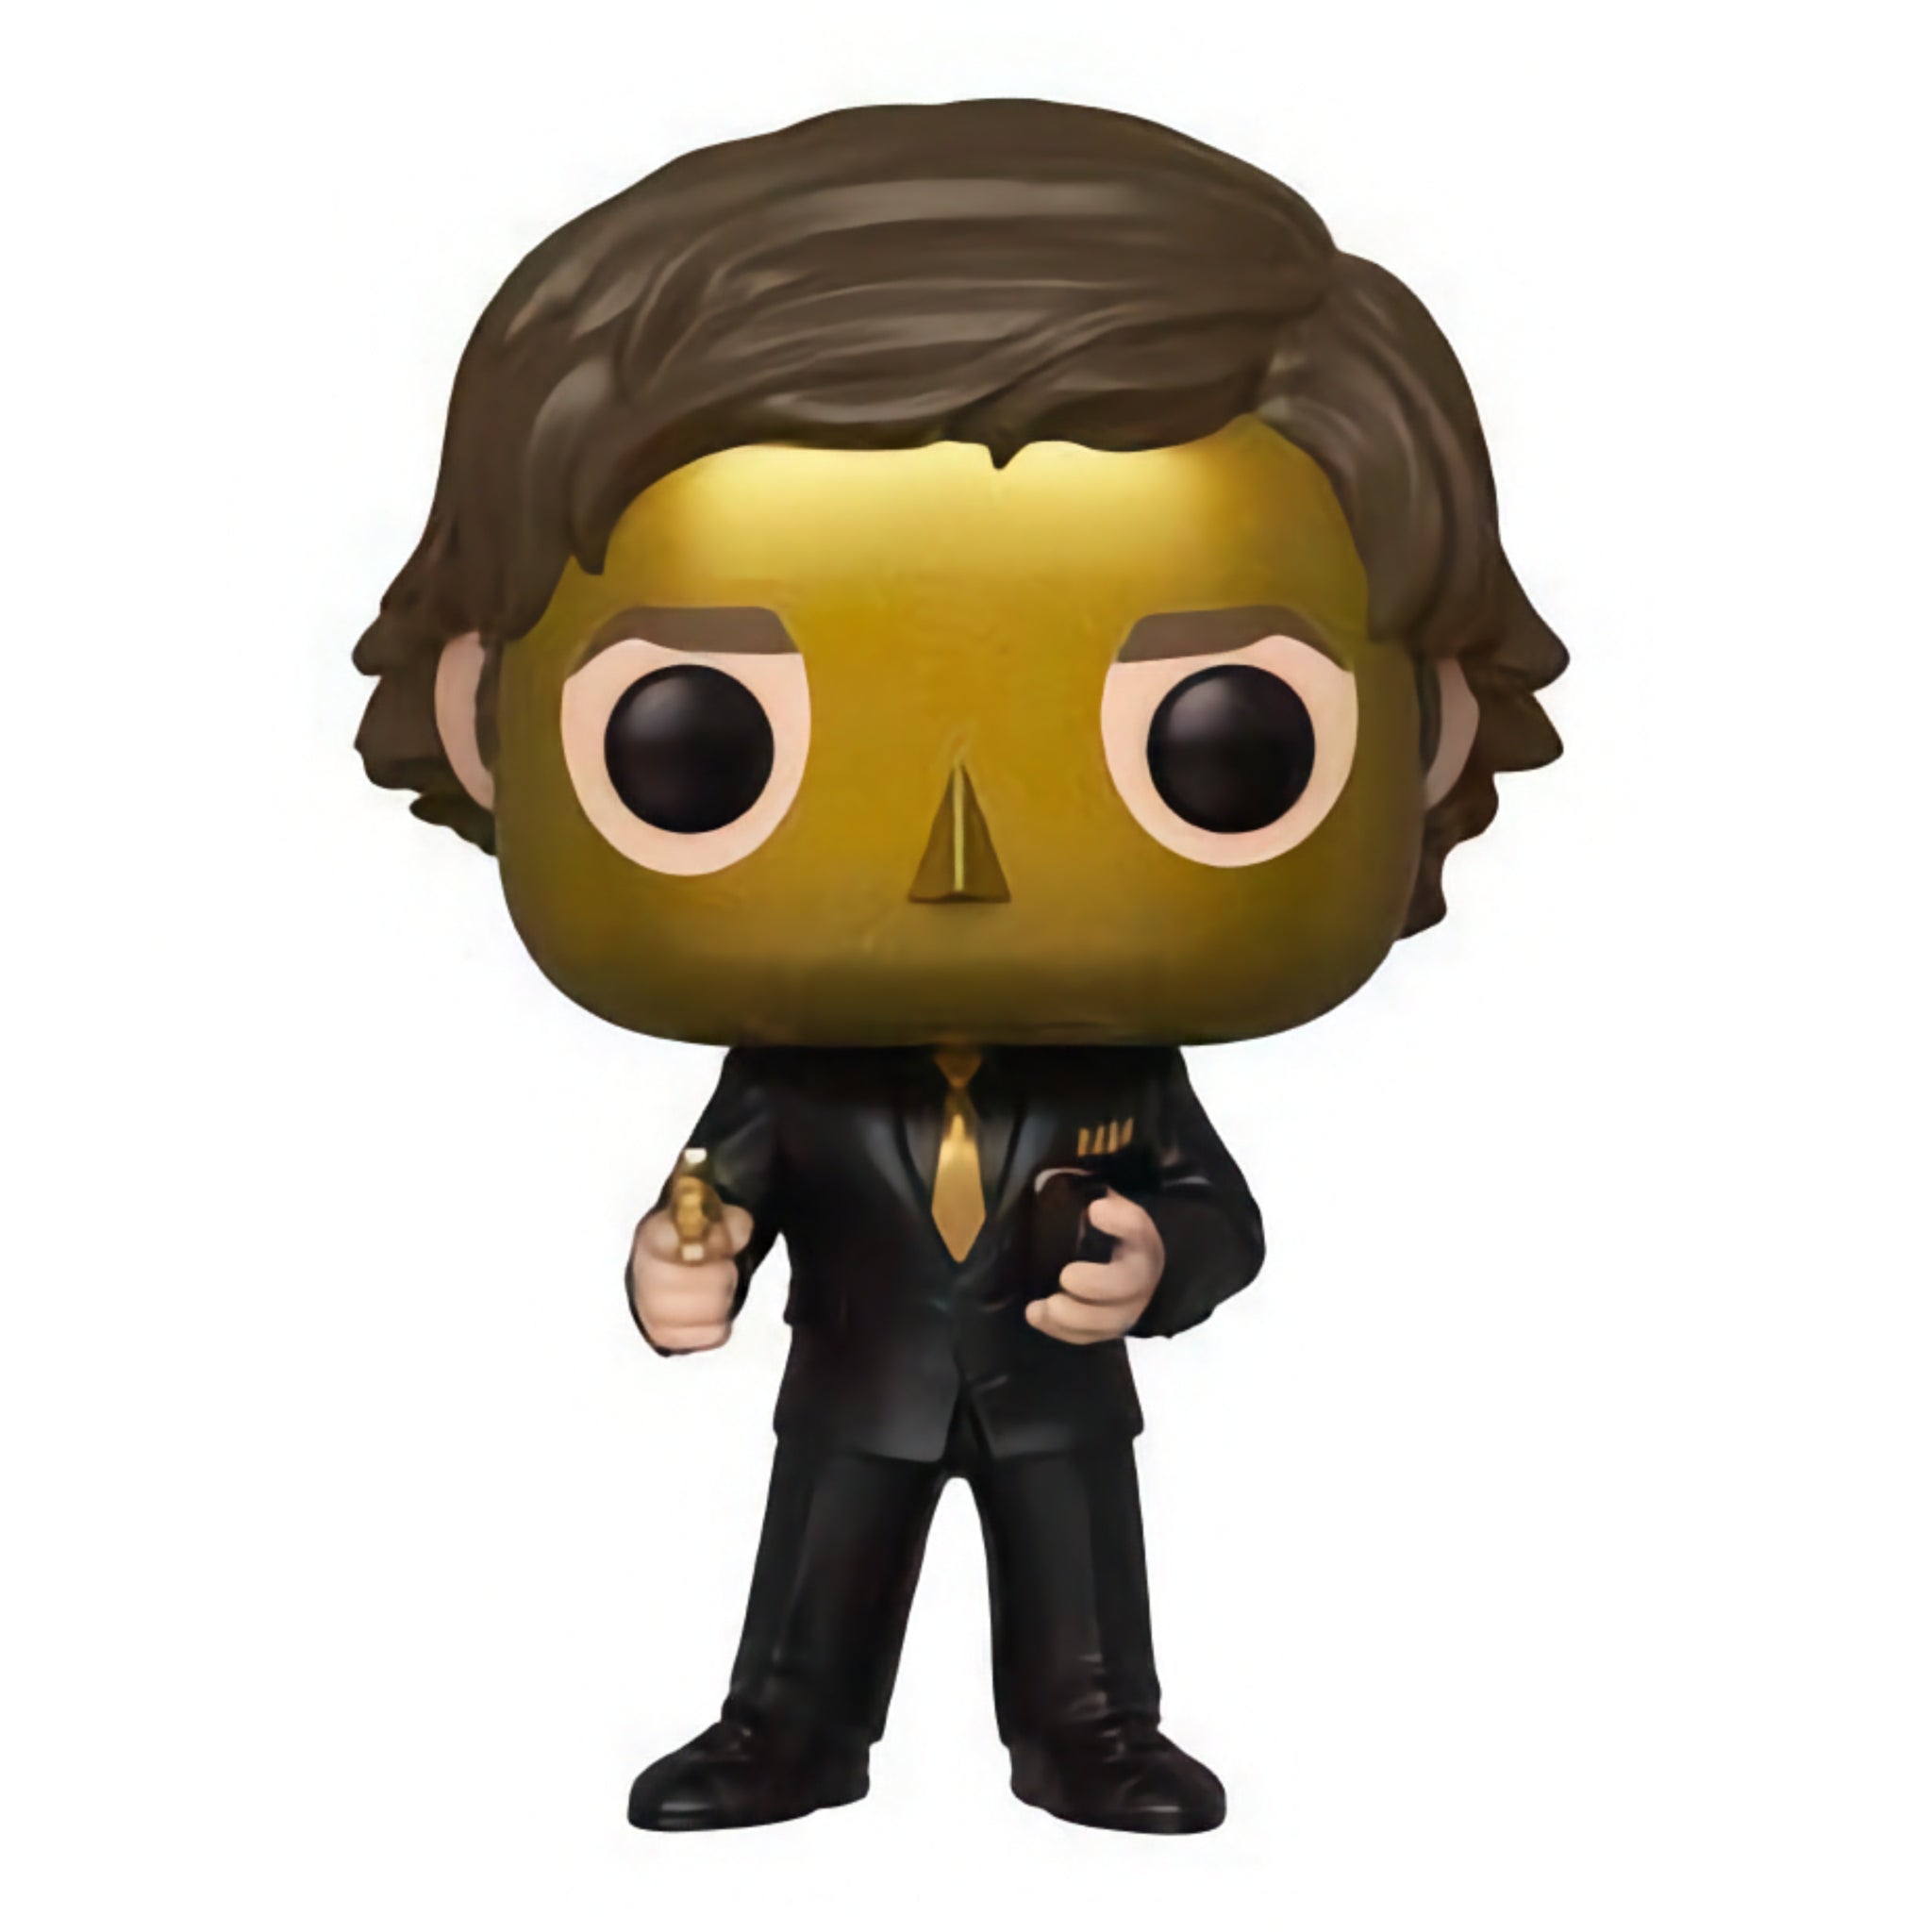 Goldenface Funko Pop! SPECIAL EDITION